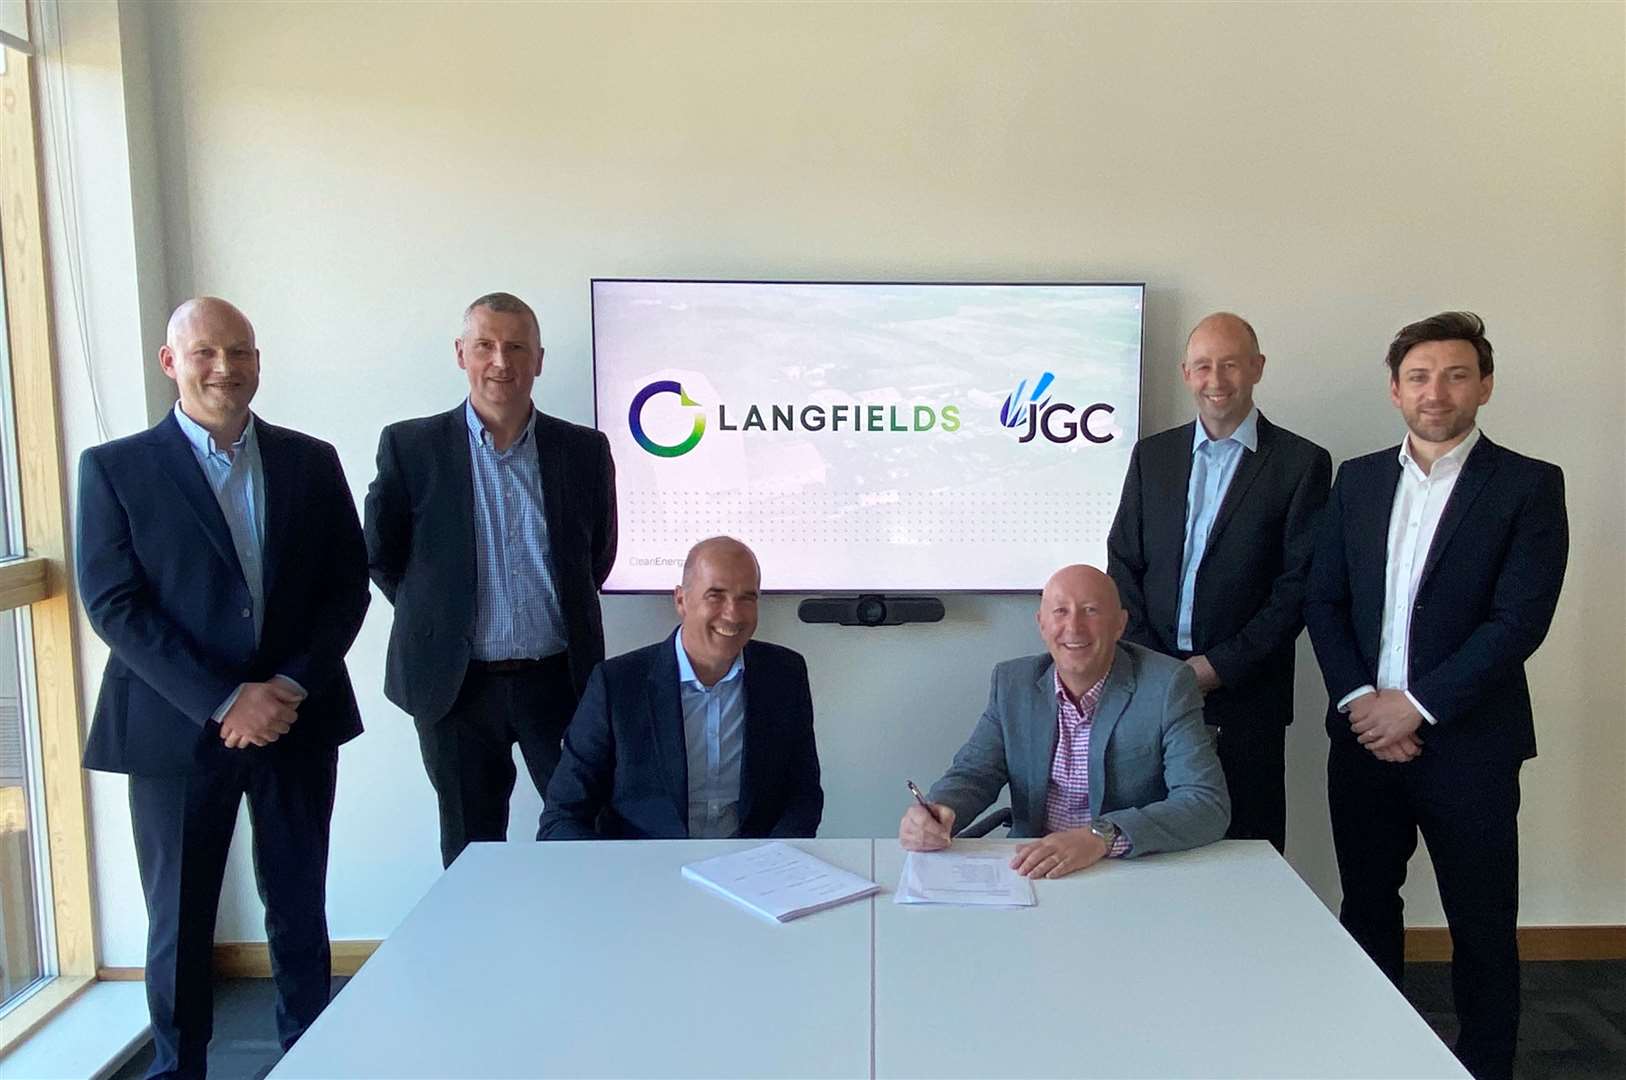 From left: John Campbell (JGC technical director), Stephen Sutherland (JGC operations director), Neil Yates (Langfields group managing director), Will Campbell (JGC managing director), Robbie Campbell (JGC engineering director) and Gary McGarrity (Langfields group financial director).